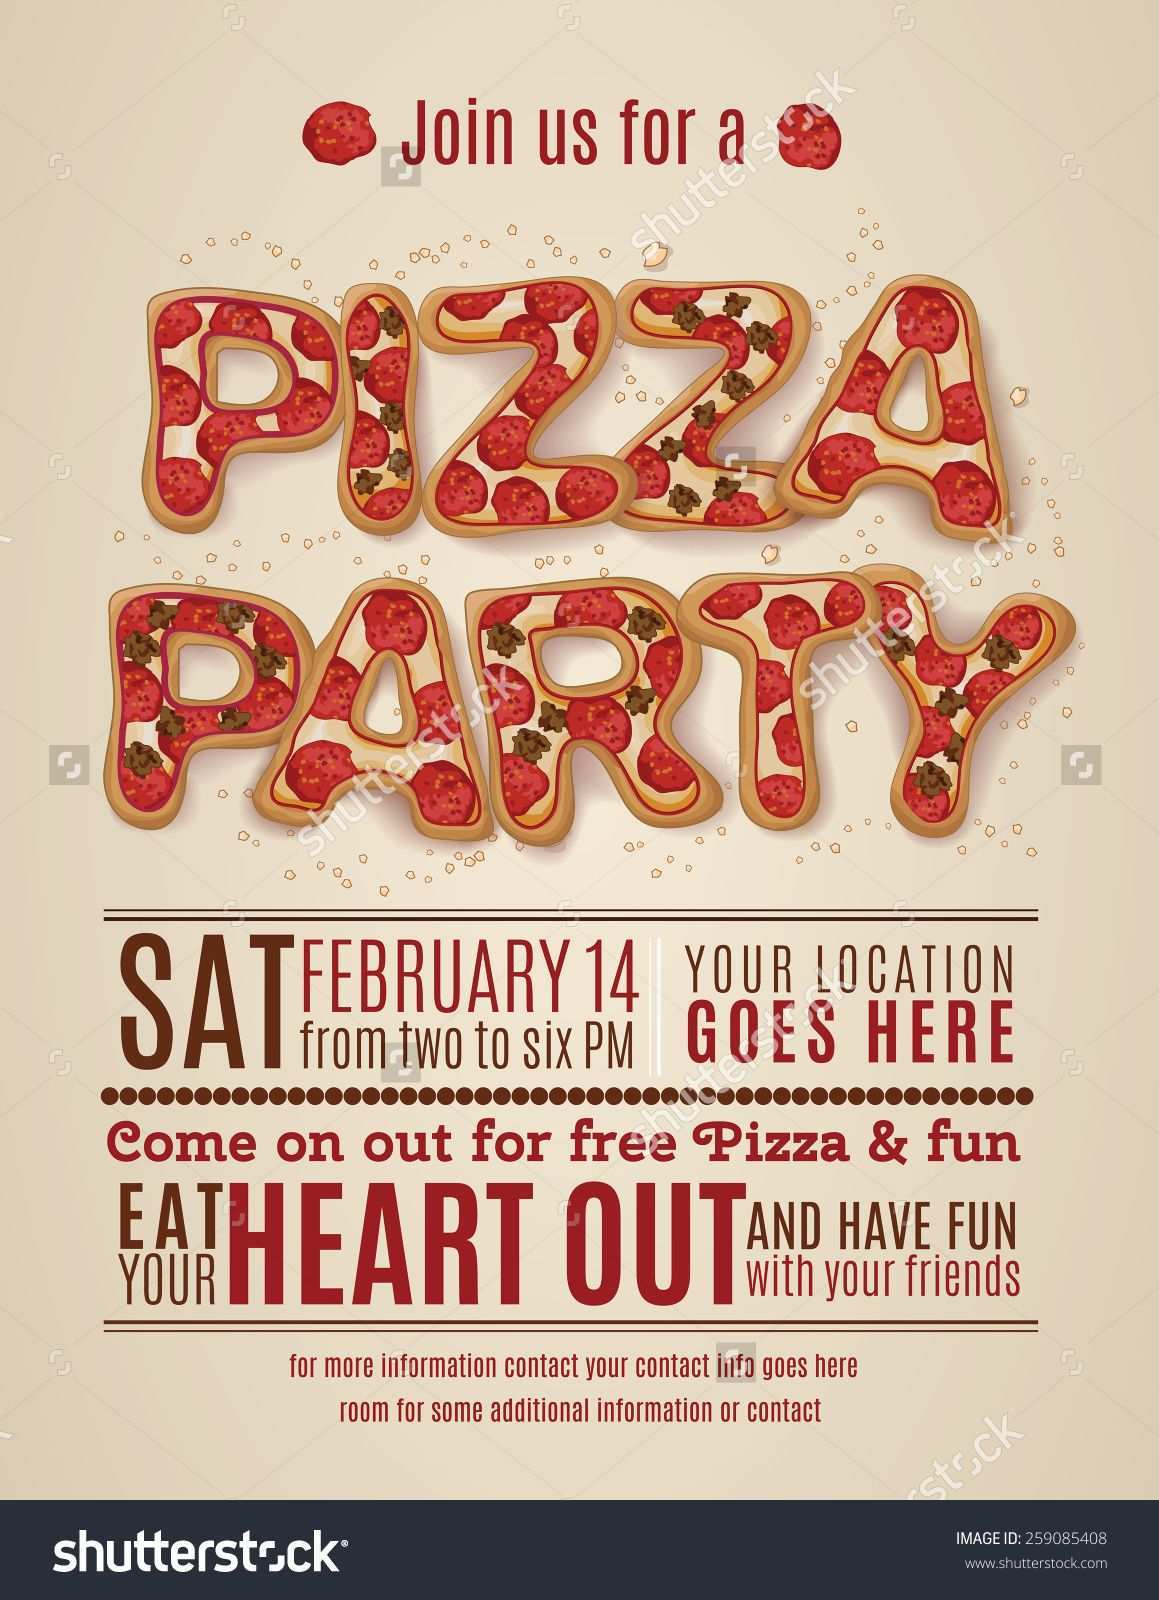 51 Printable Pizza Party Flyer Template Free Maker with Pizza Party Flyer Template Free